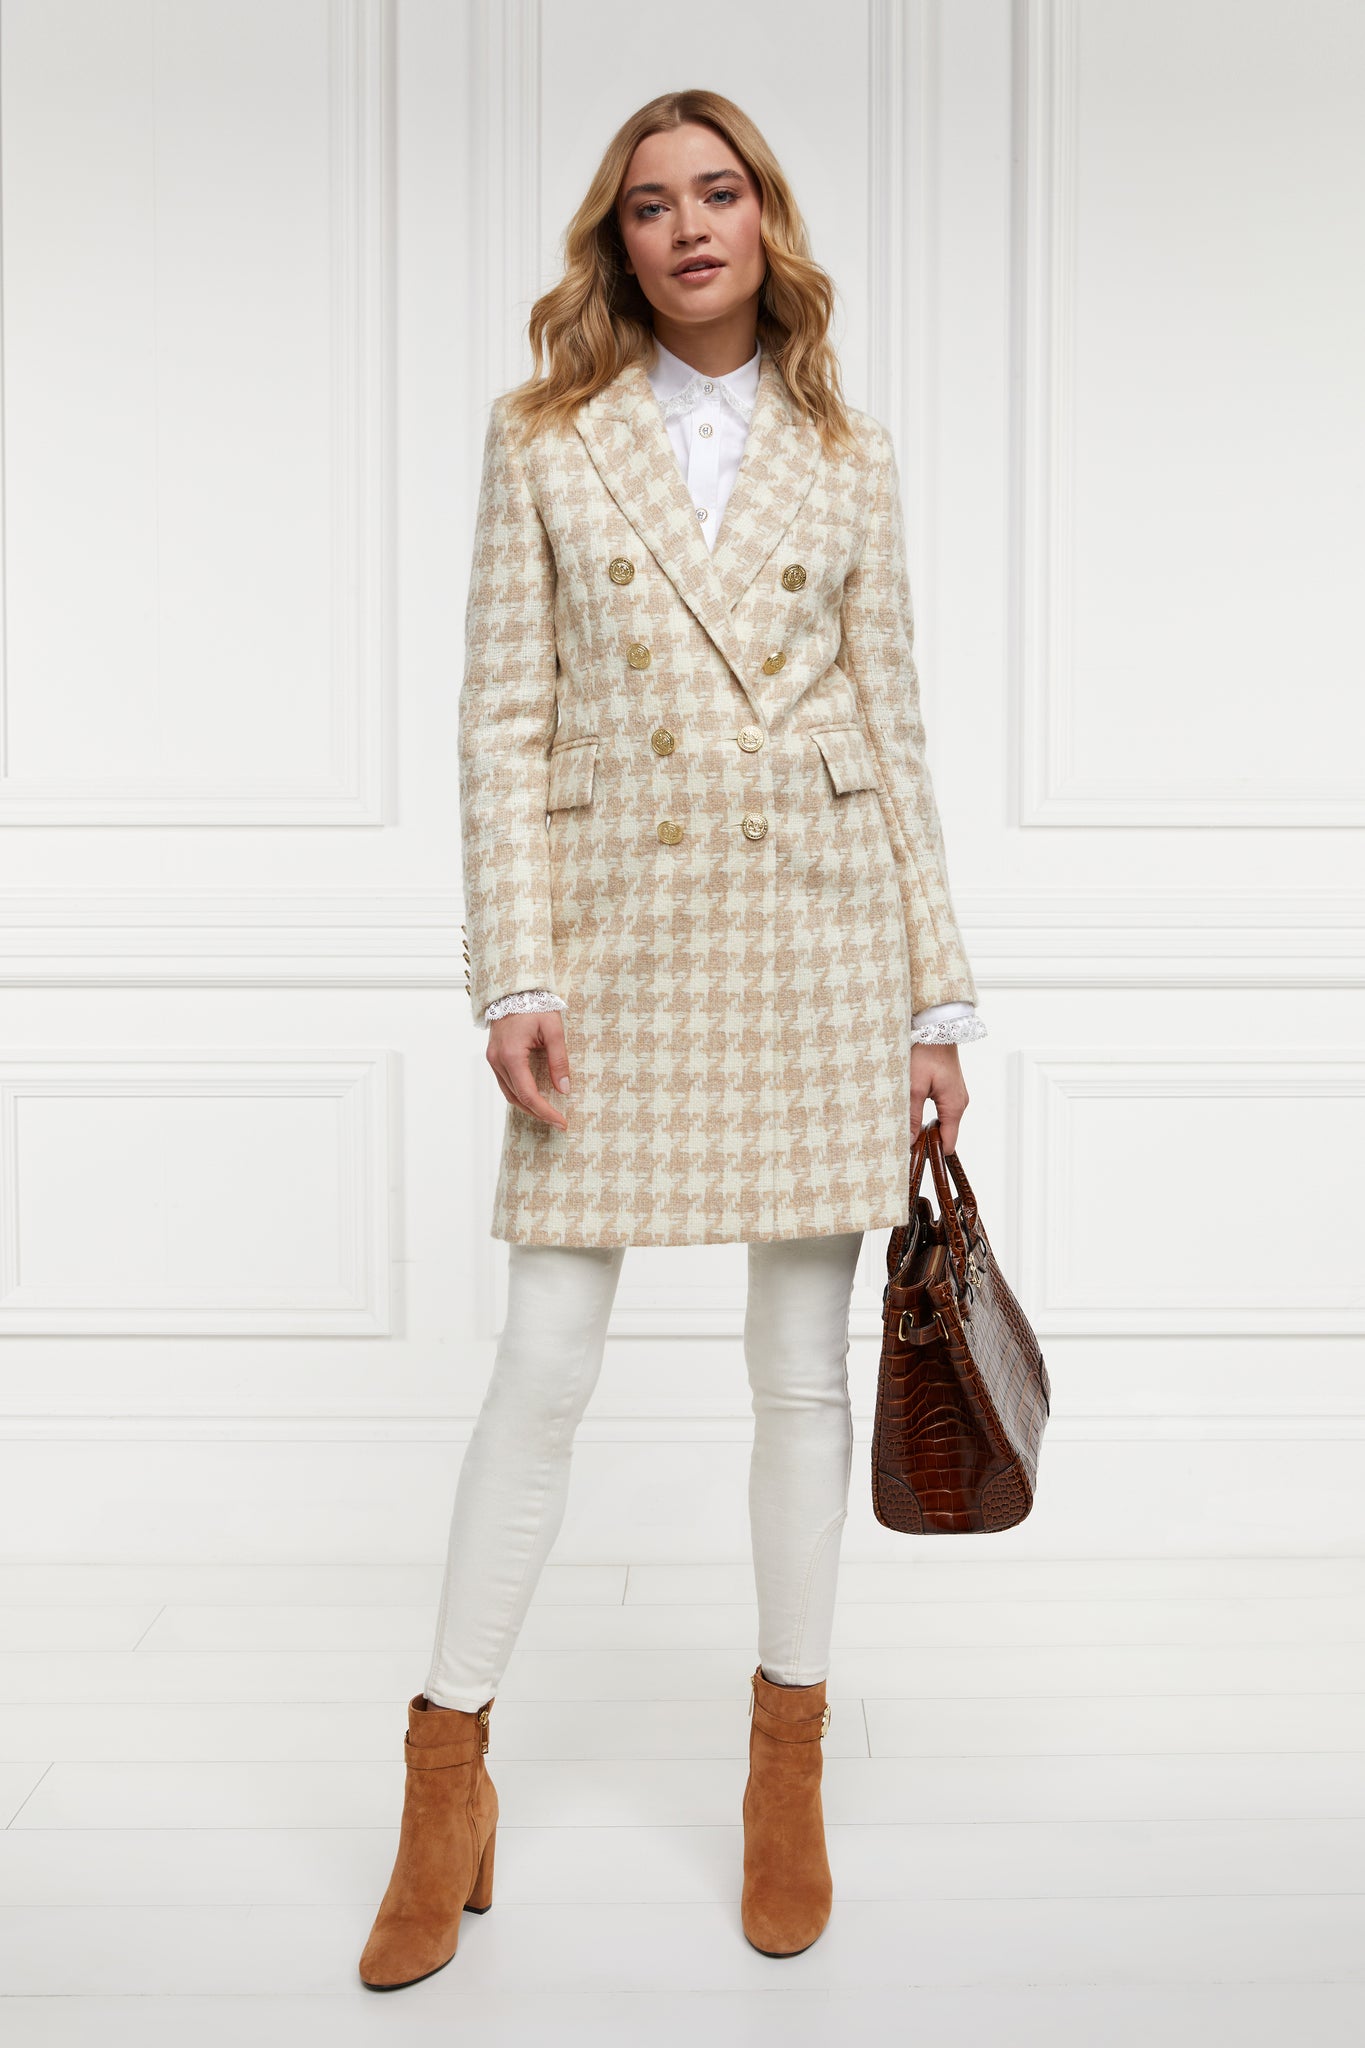 camel and cream houndstooth wool womens coat with gold hardware holding tan croc leather tote bag